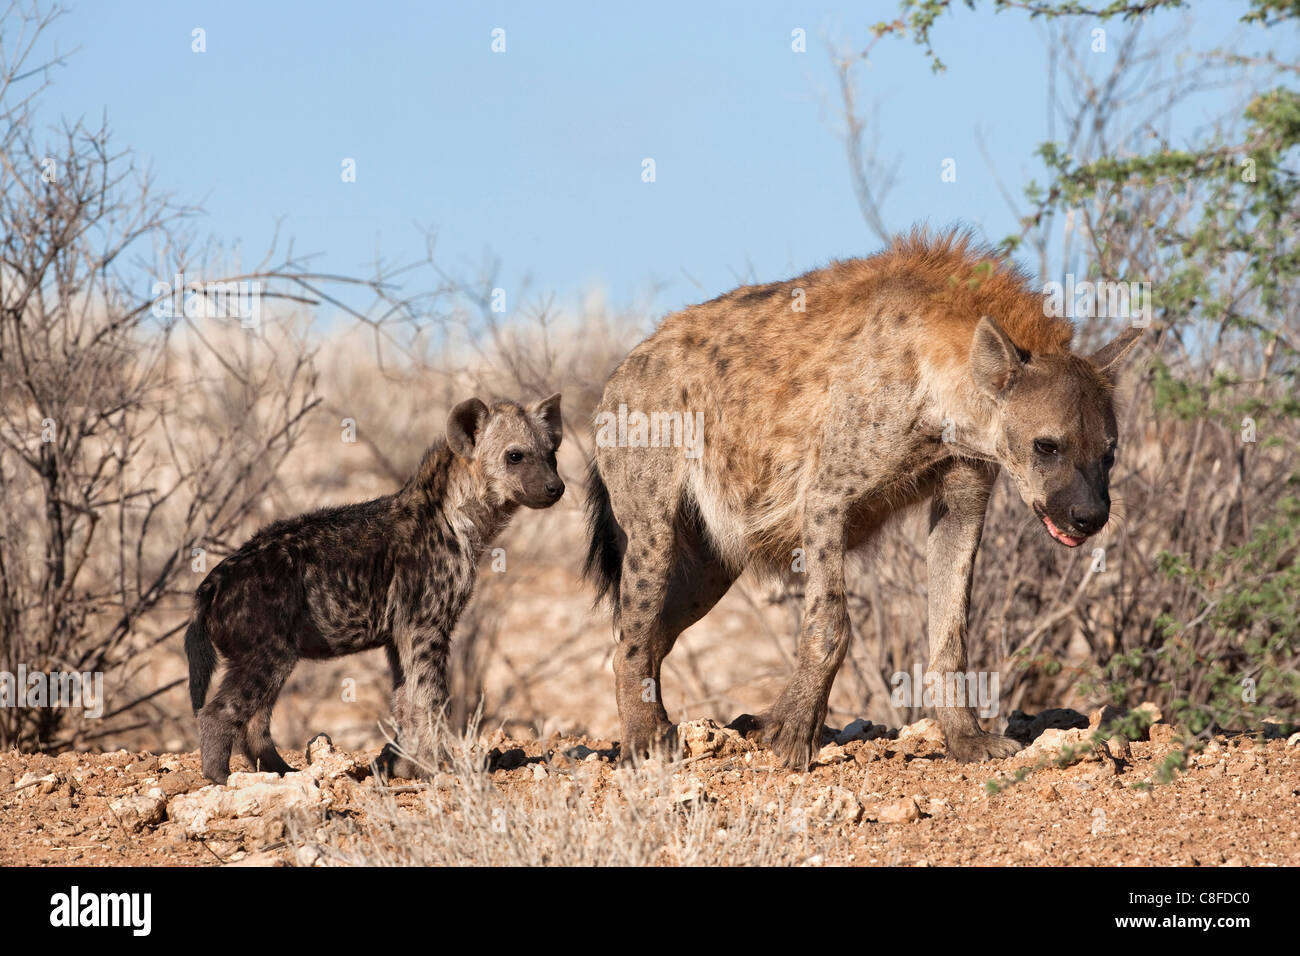 Spotted hyena with cub, South Africa Stock Photo